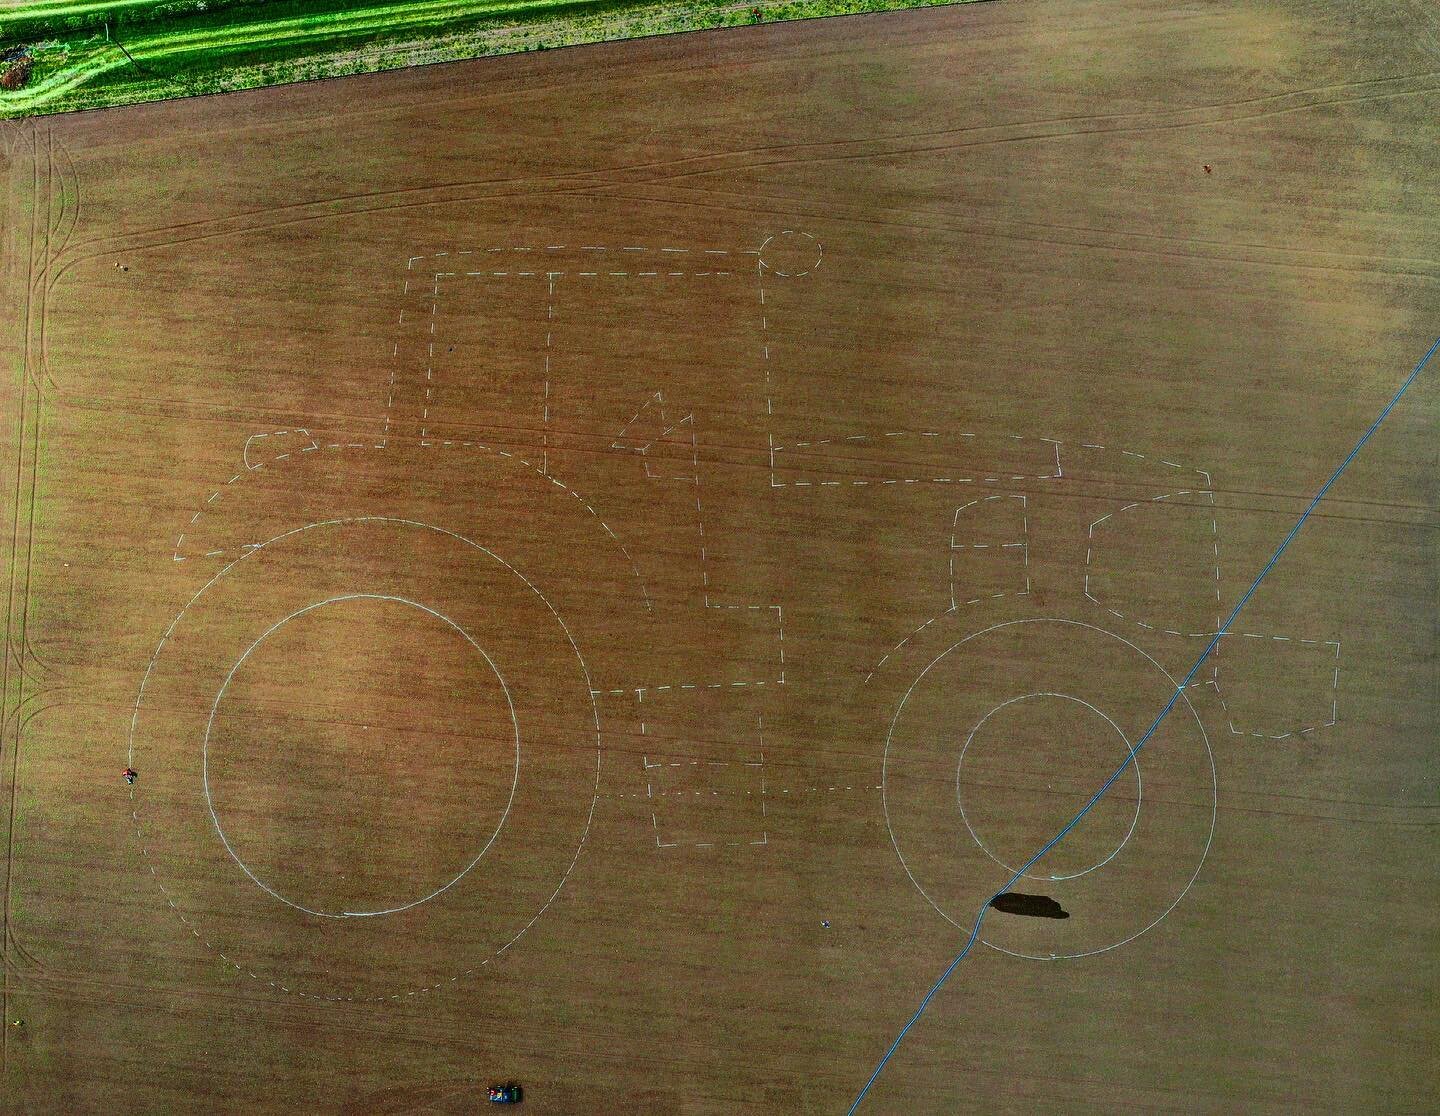 We&rsquo;ve actually managed to do something without things going tits up 🤠(bar the leaky hose)

The 30,000m^2 sunflower trail has been marked out and it somewhat resembles a tractor, some imagination on our behalf 🥴 Seems we&rsquo;re better with l